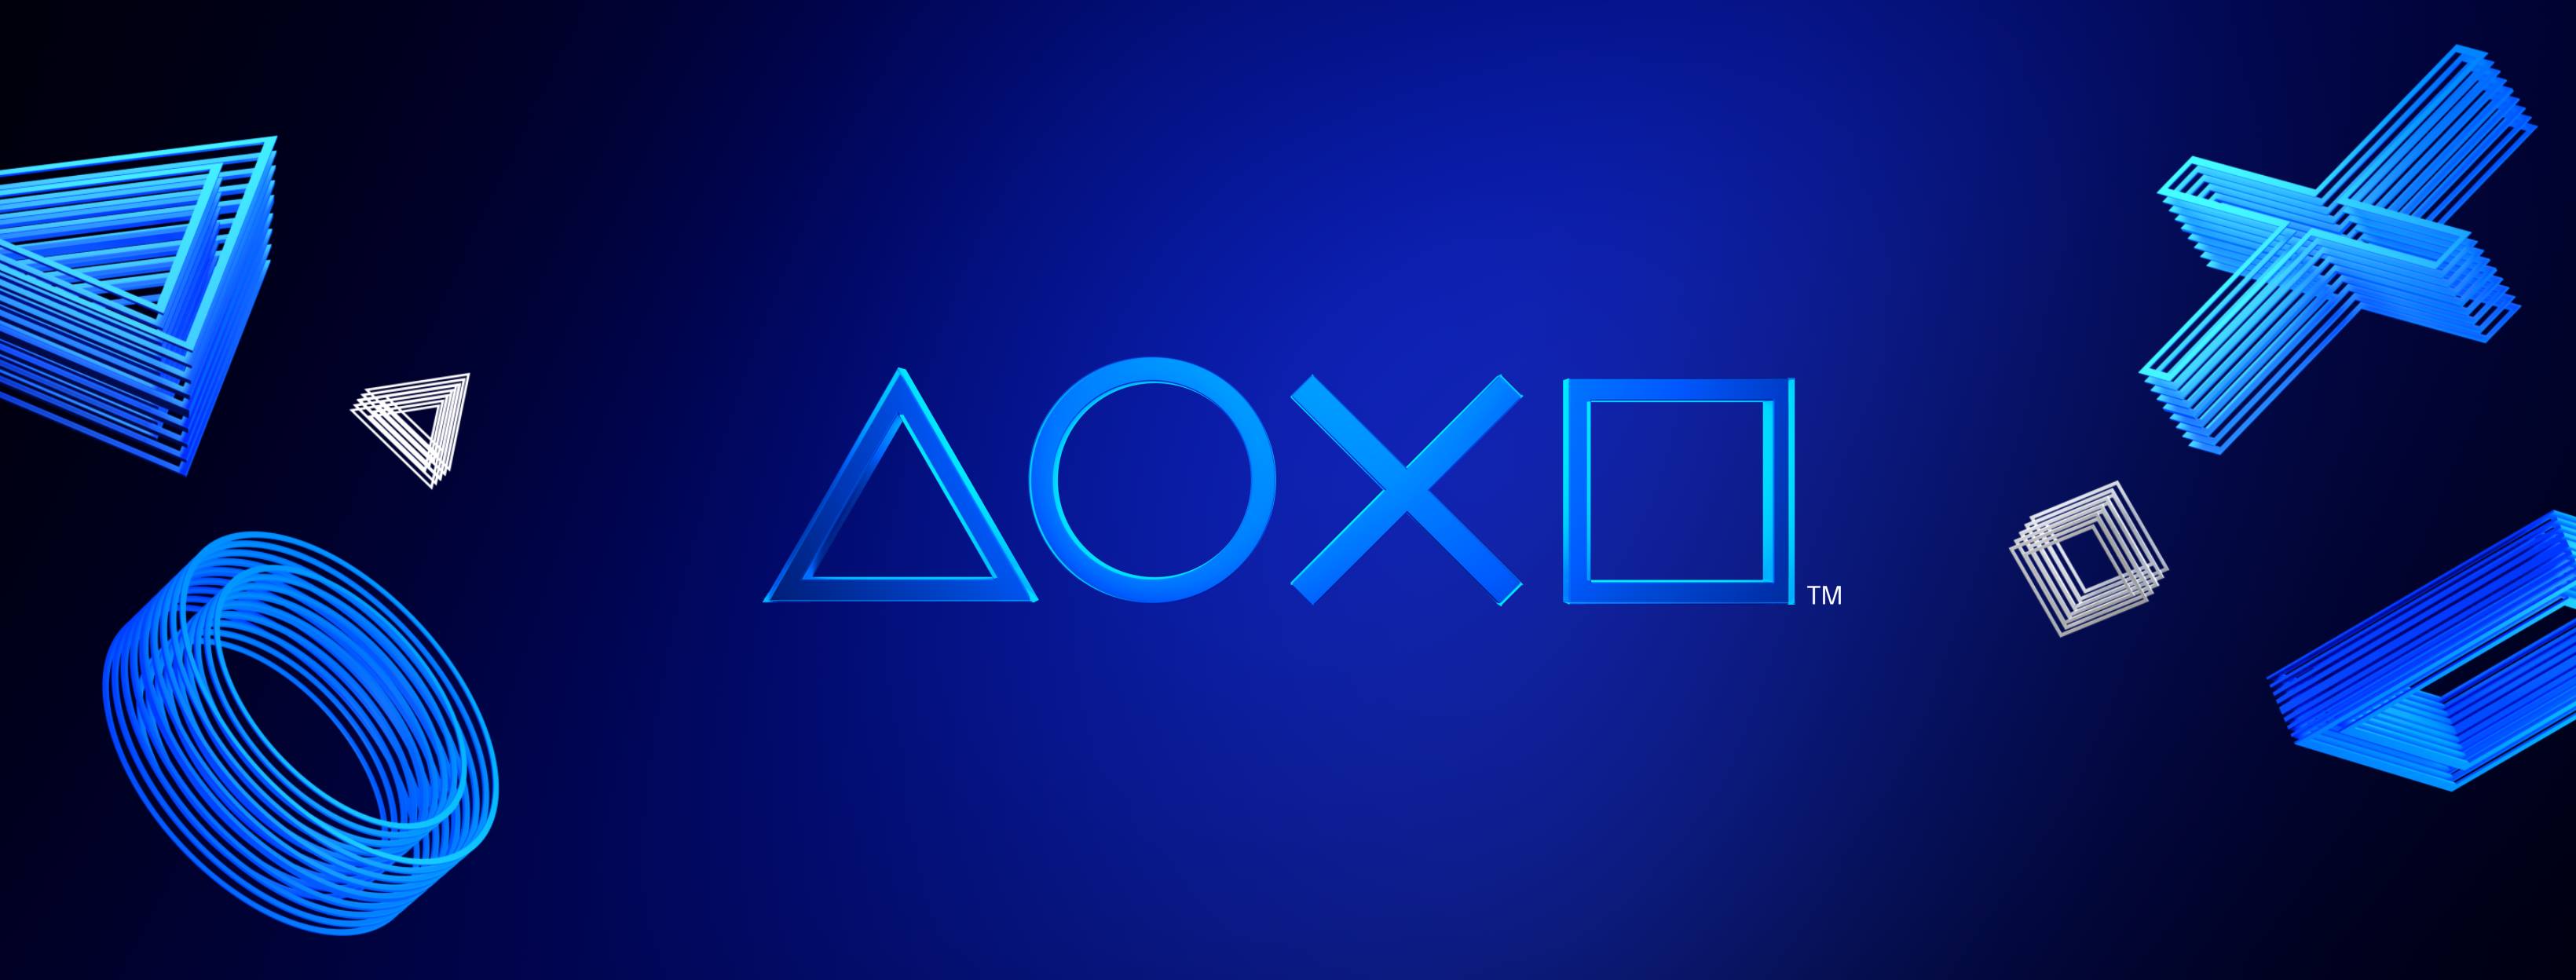 About sony interactive entertainment playStation